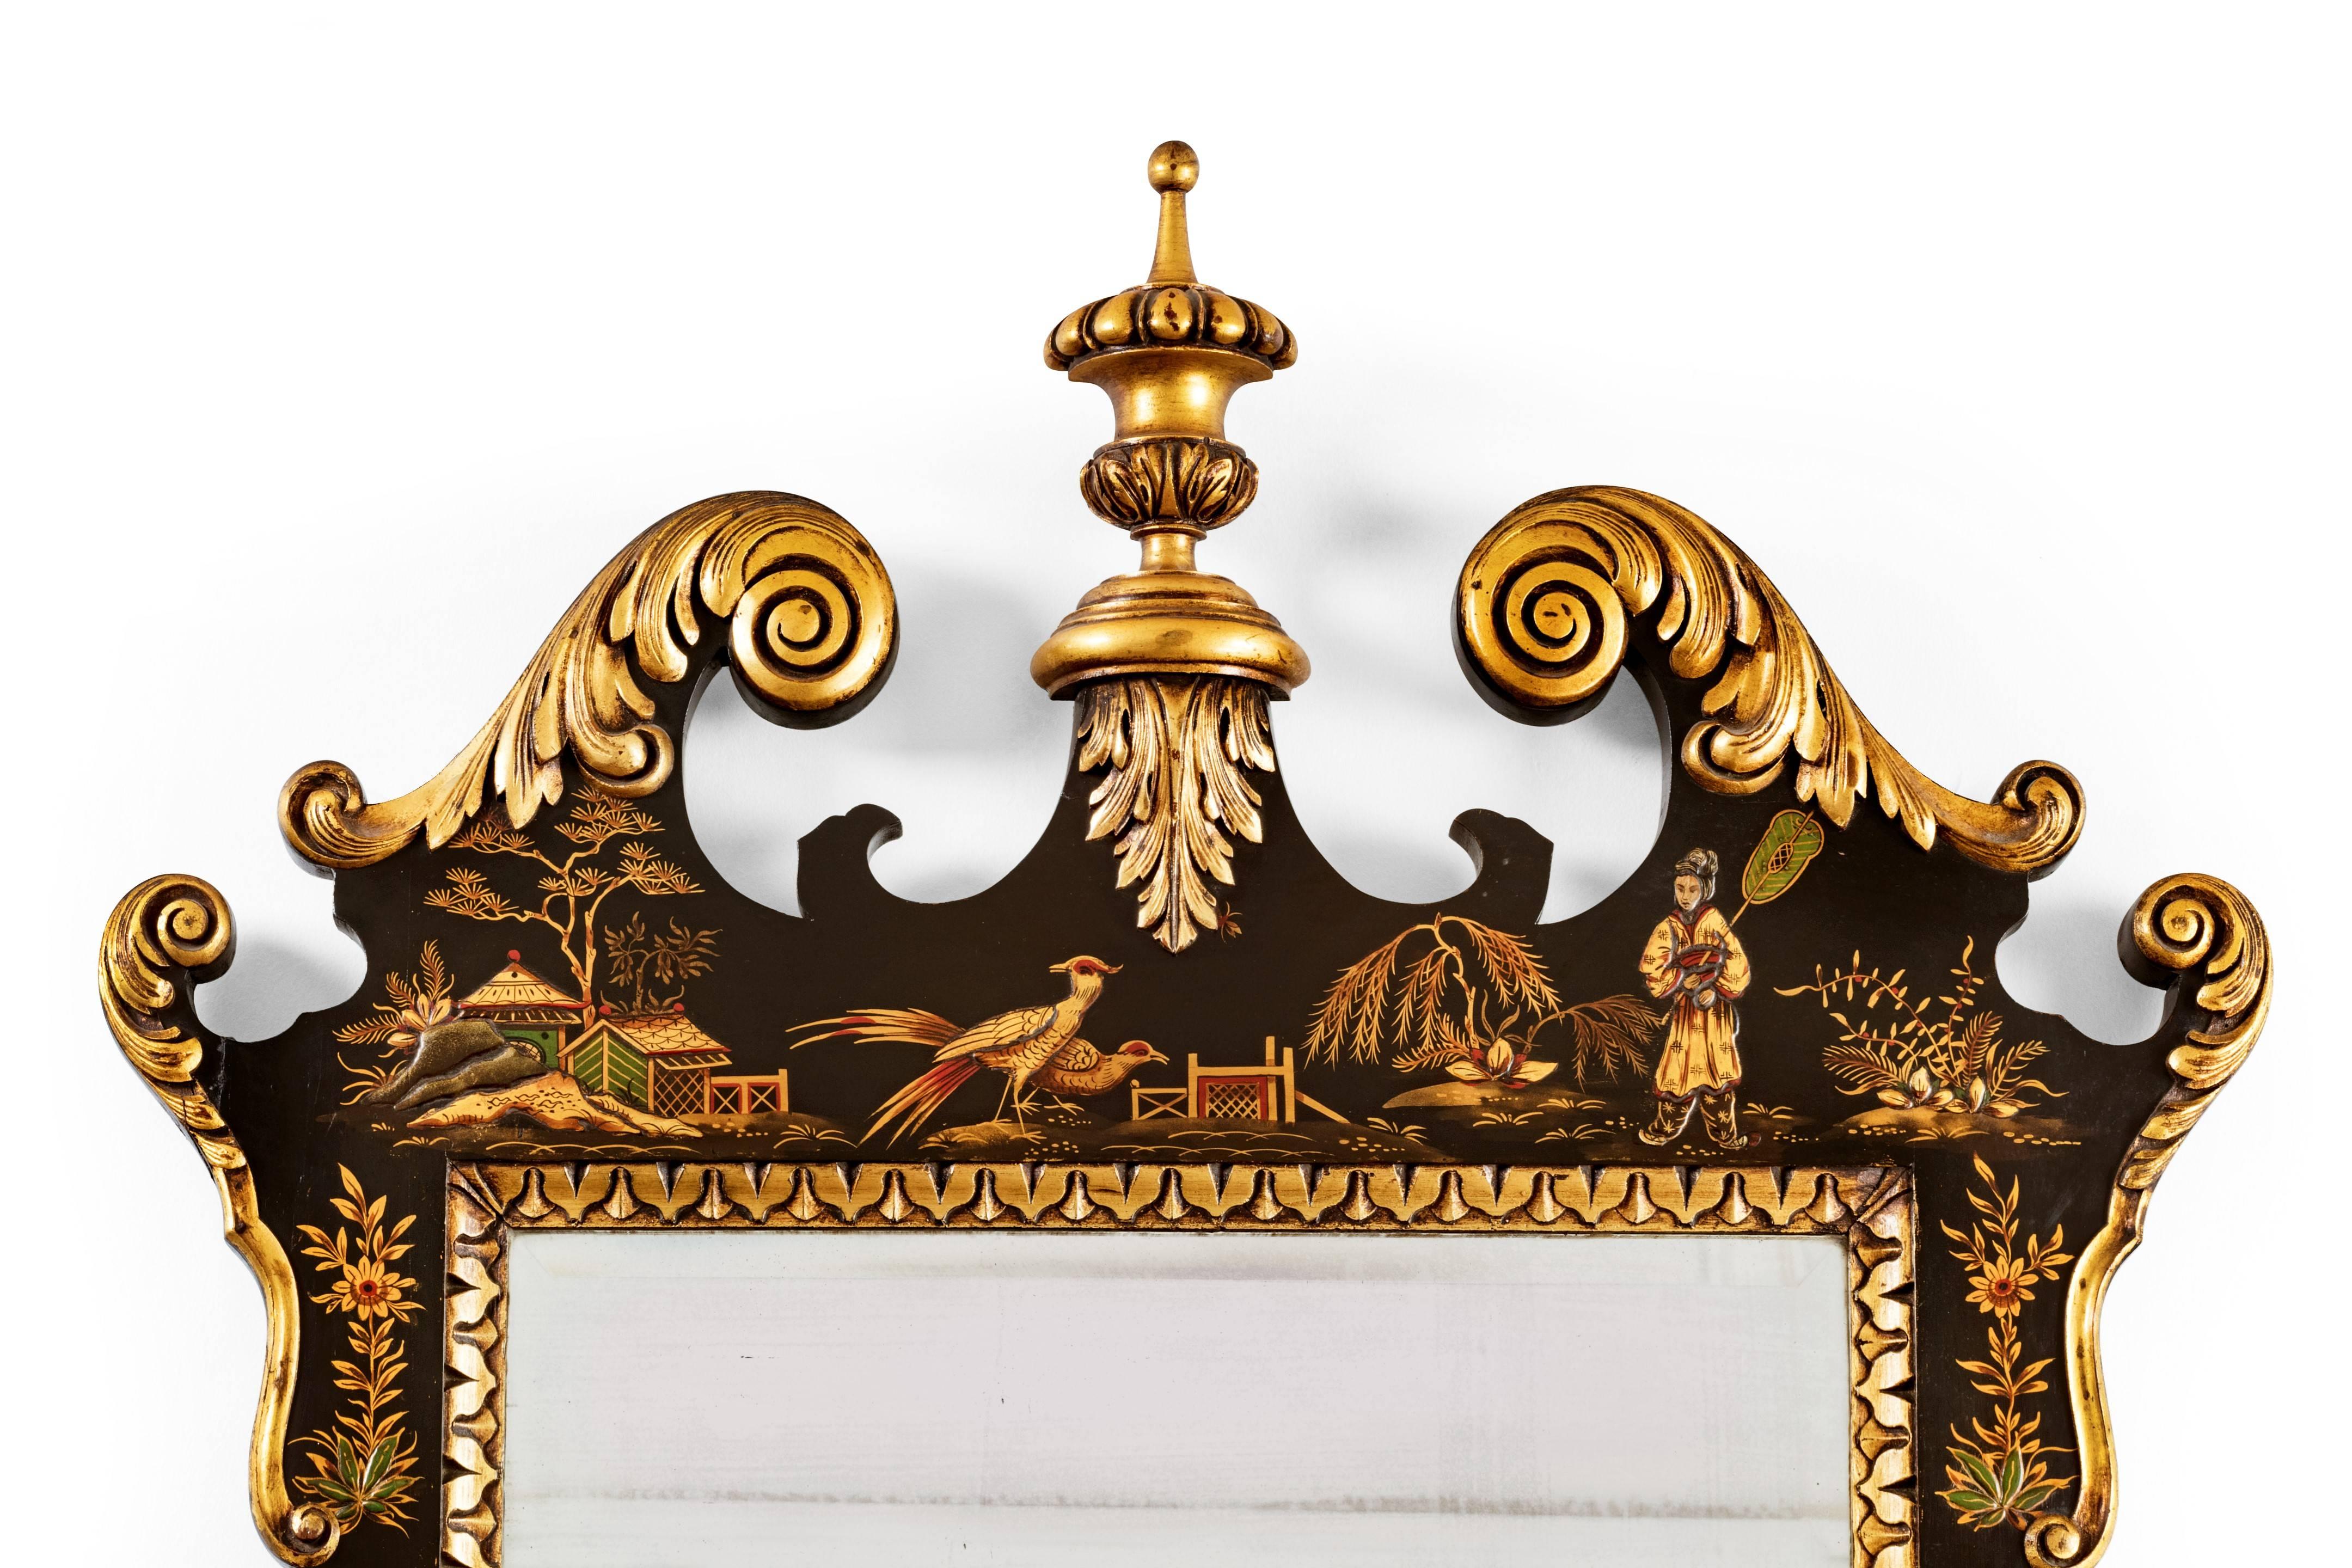 A superb quality and finely executed gilded and black japanned mirror in the early 18th century Baroque style, with a bevelled edge glass.